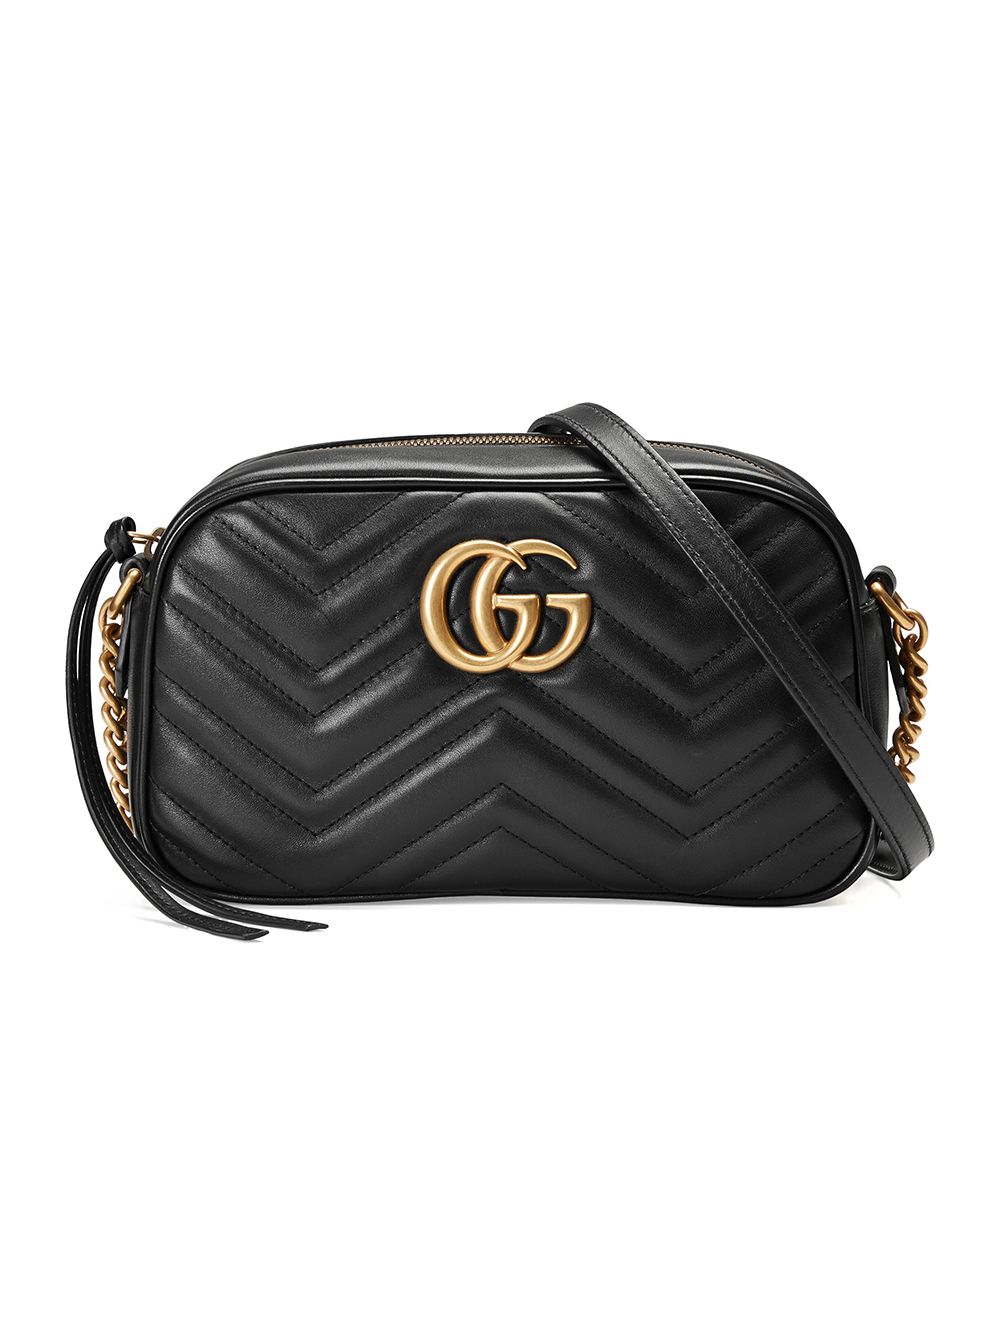 Shop Black Brown Gucci Gg Marmont Small Matelasse Shoulder Bag With Express Delivery Worldarchitecturefestival